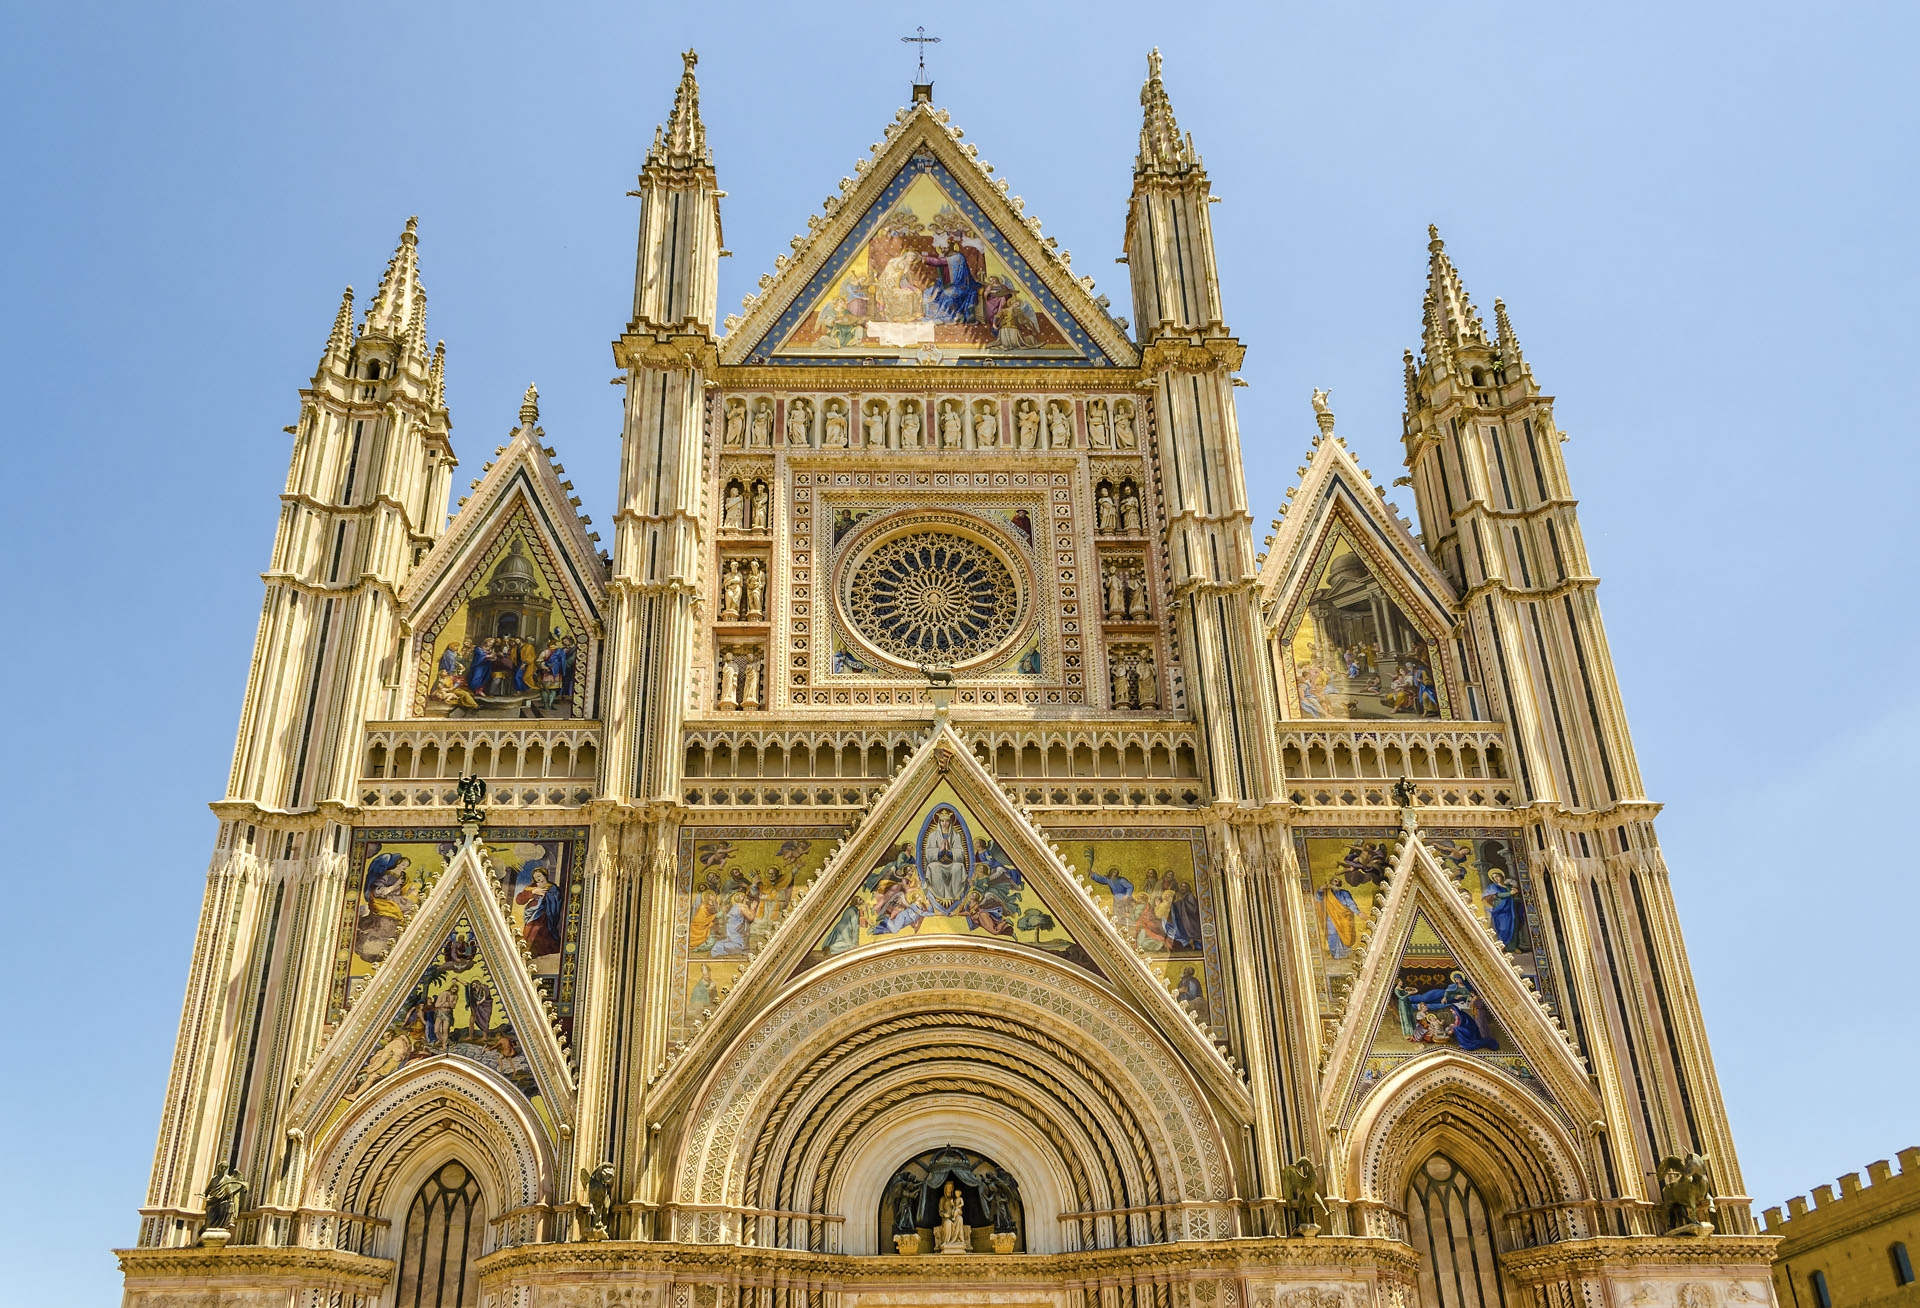 Facade of the Orvieto Cathedral, Italy